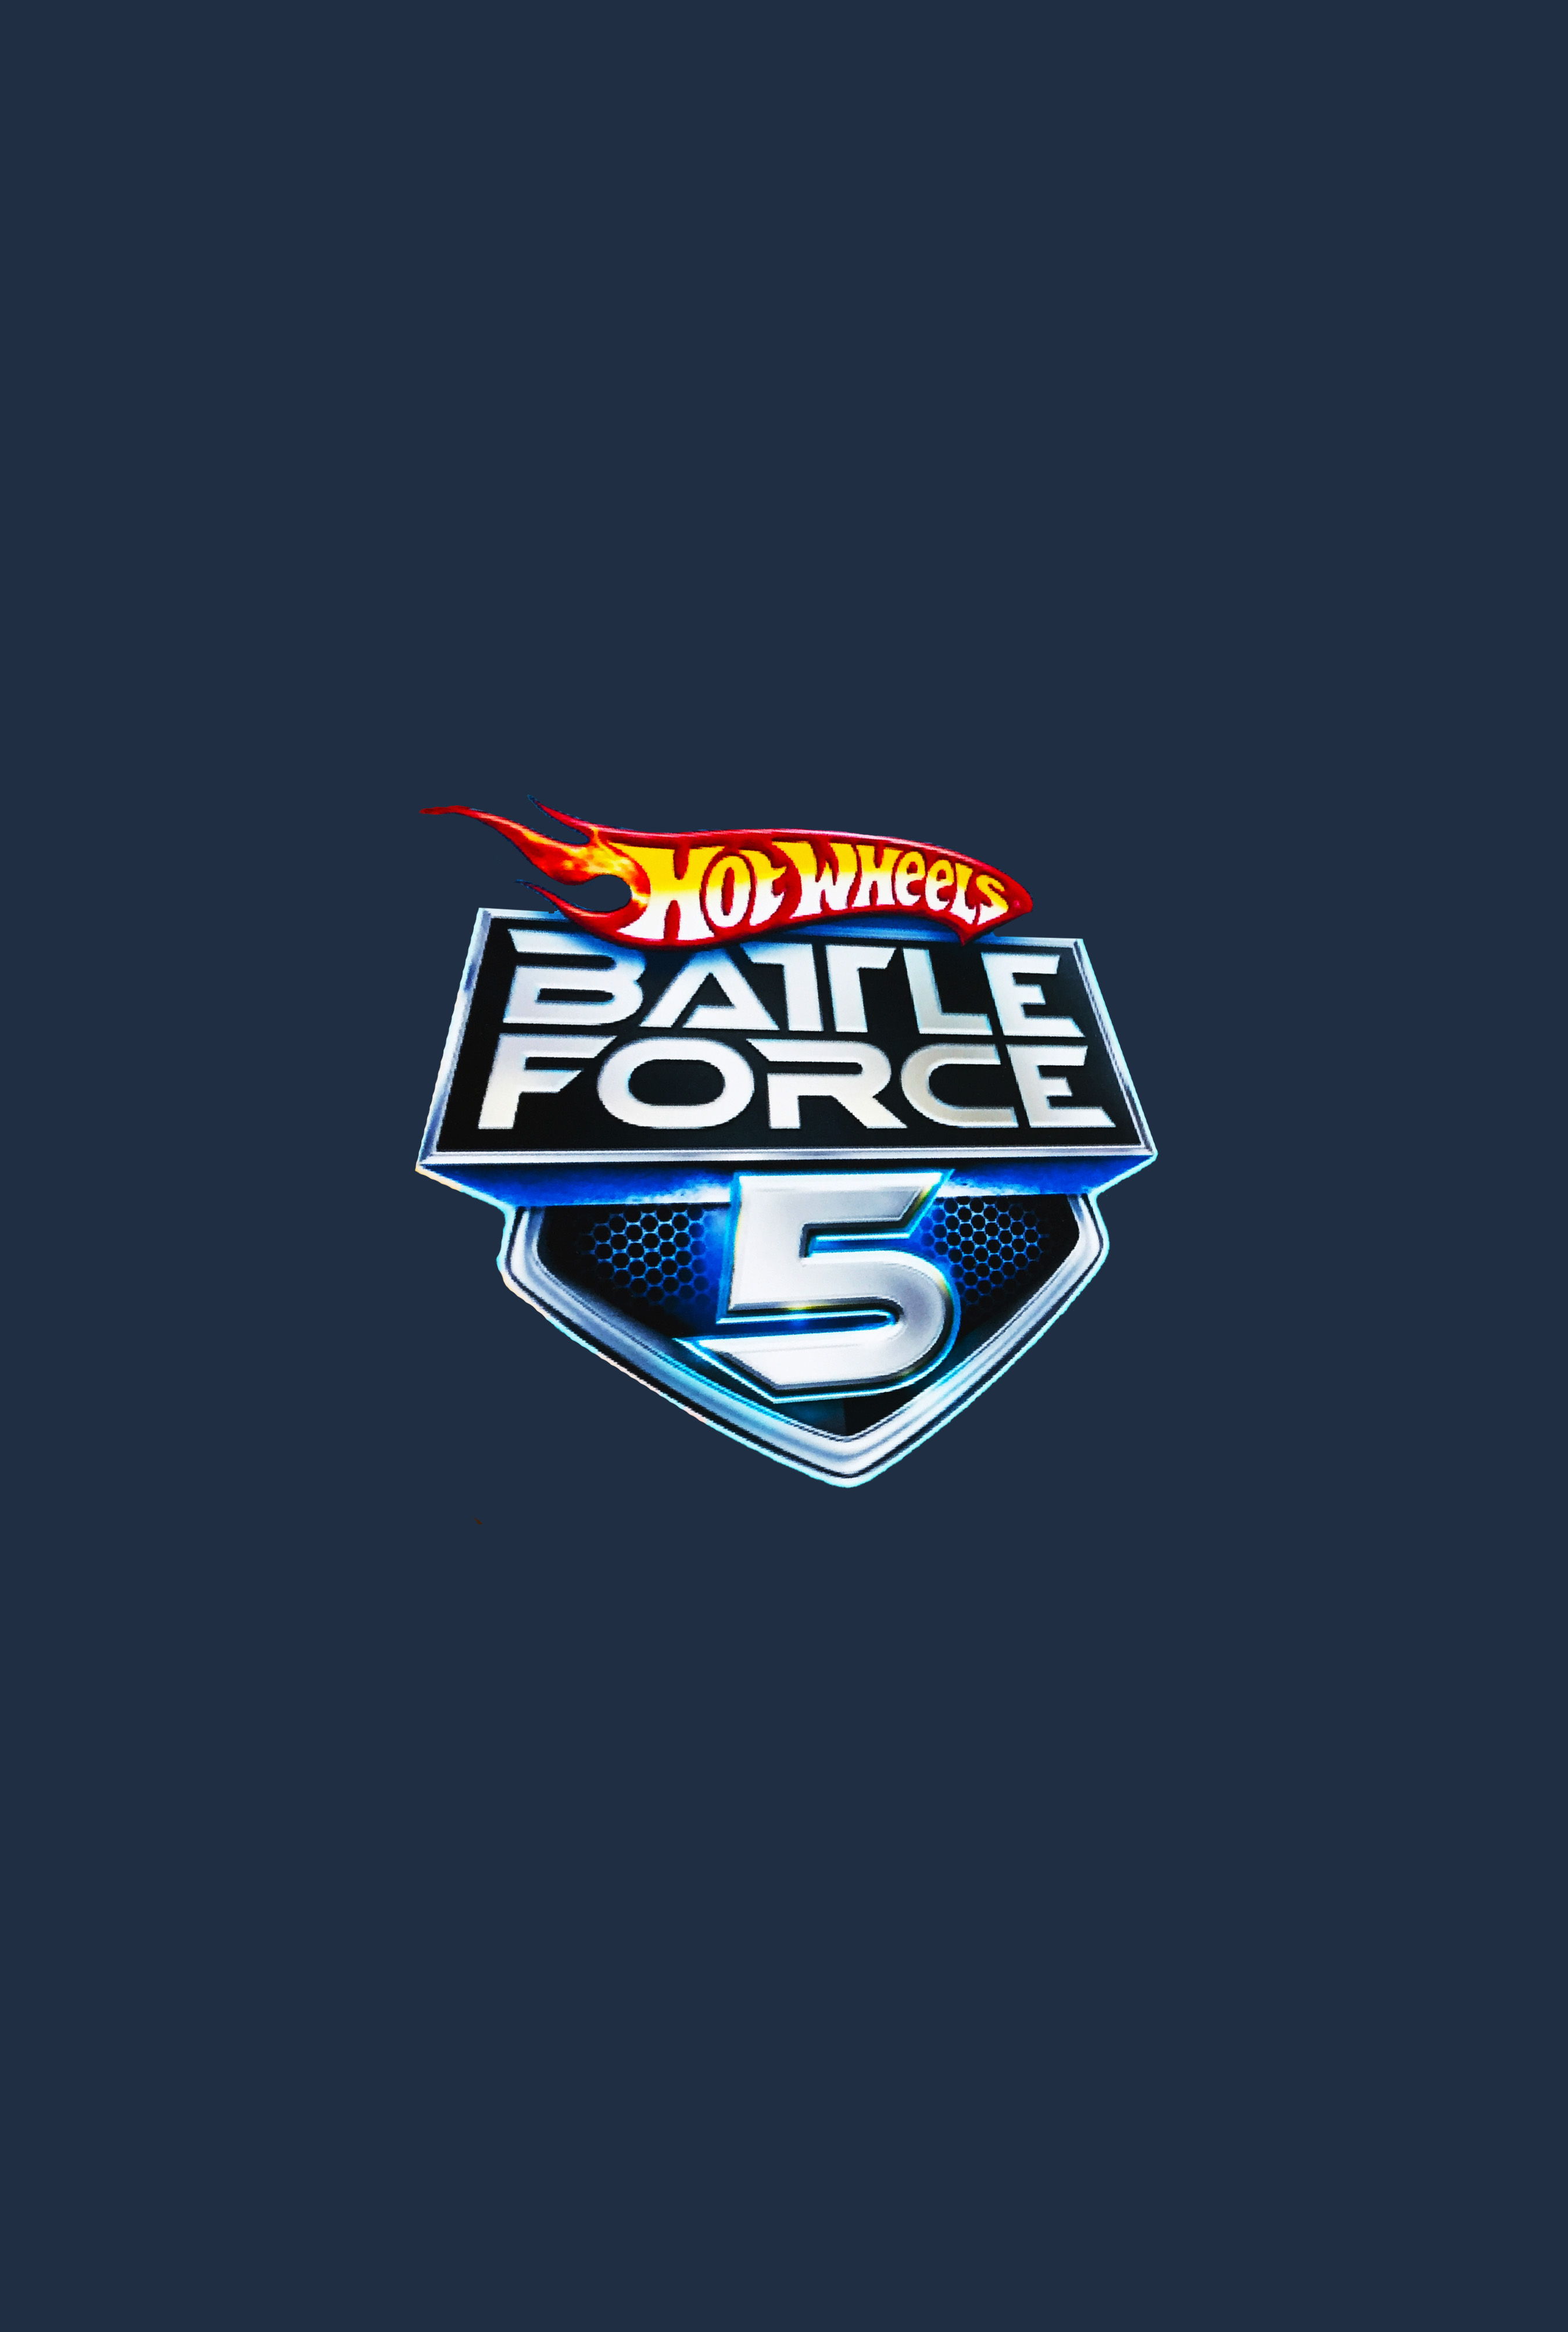 Hot Wheels: Battle Force 5 - Where to Watch and Stream - TV Guide